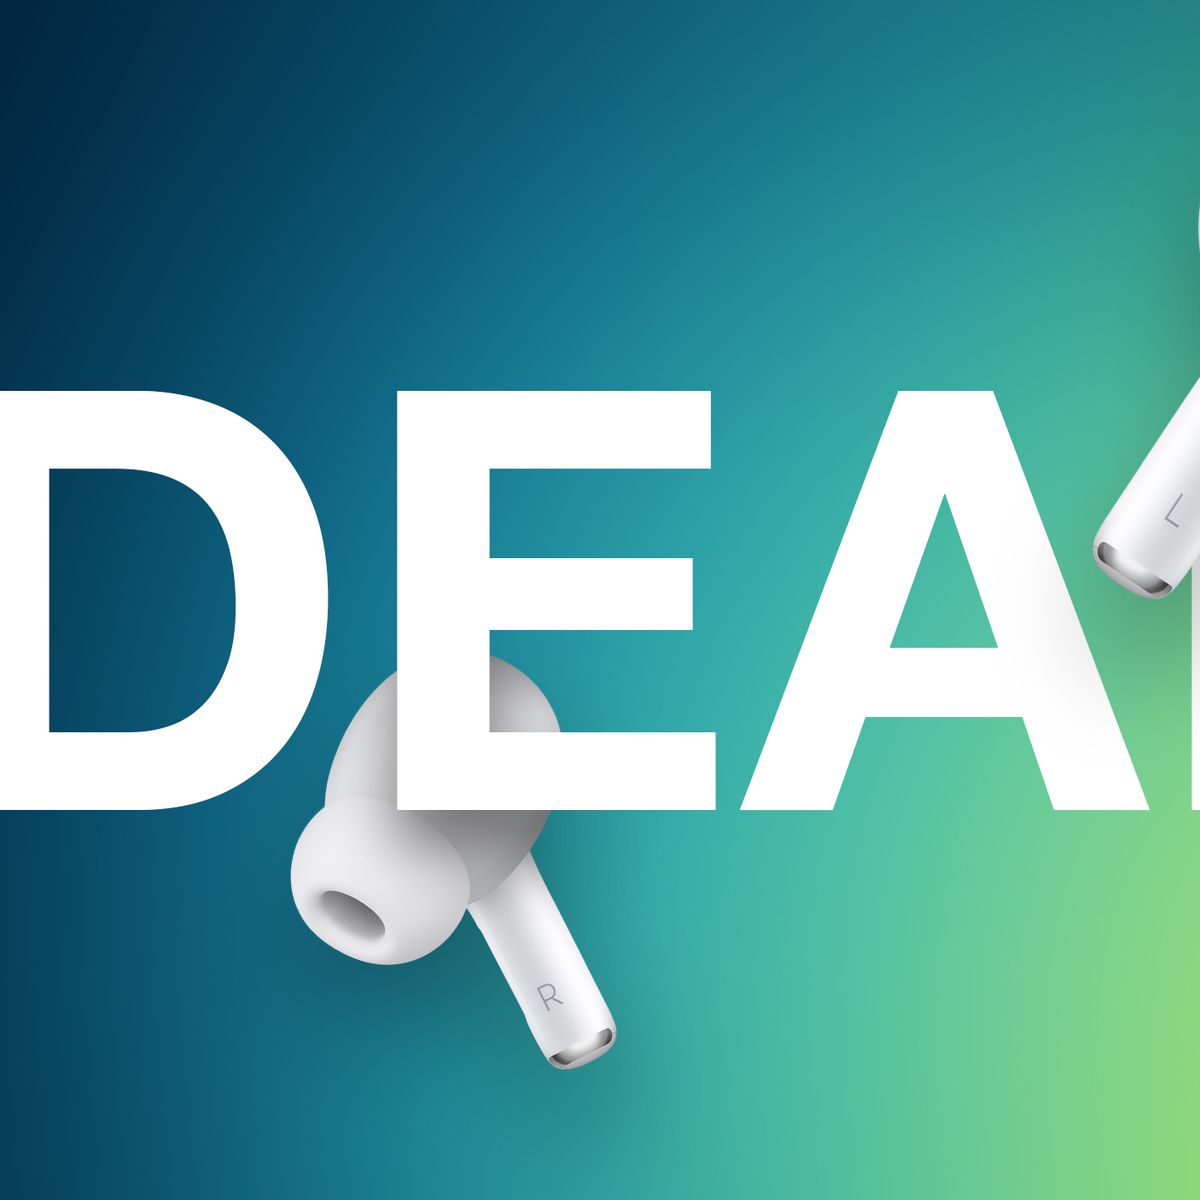 AirPods Pro 2 With USB-C Drop to Record Low $189.99 Price 